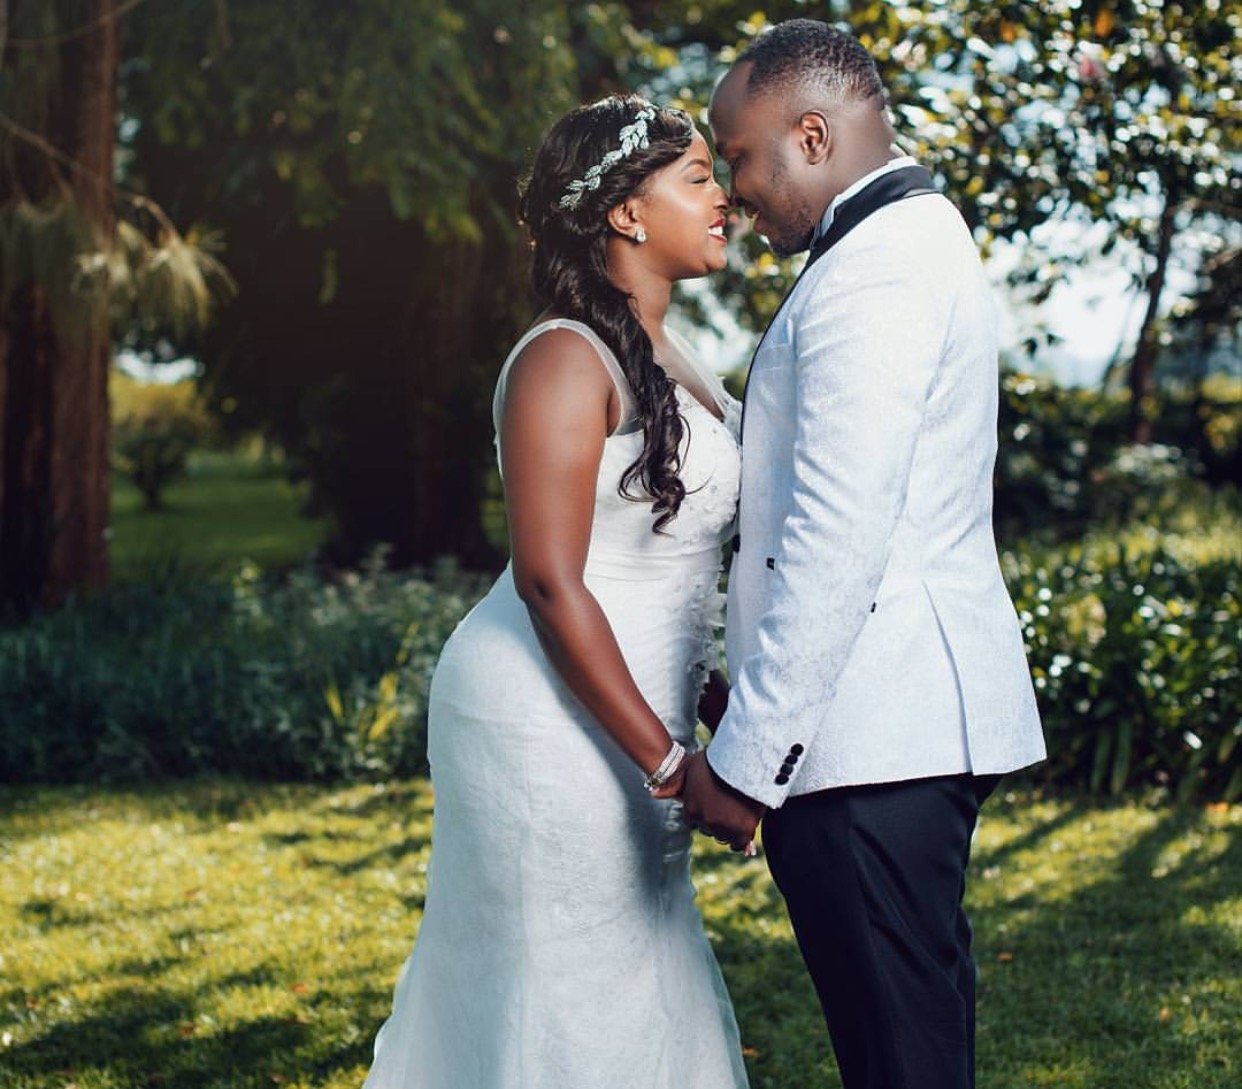 “We avoided having sex for 2 years and a half until our wedding night!” Cece Sagini and husband open up